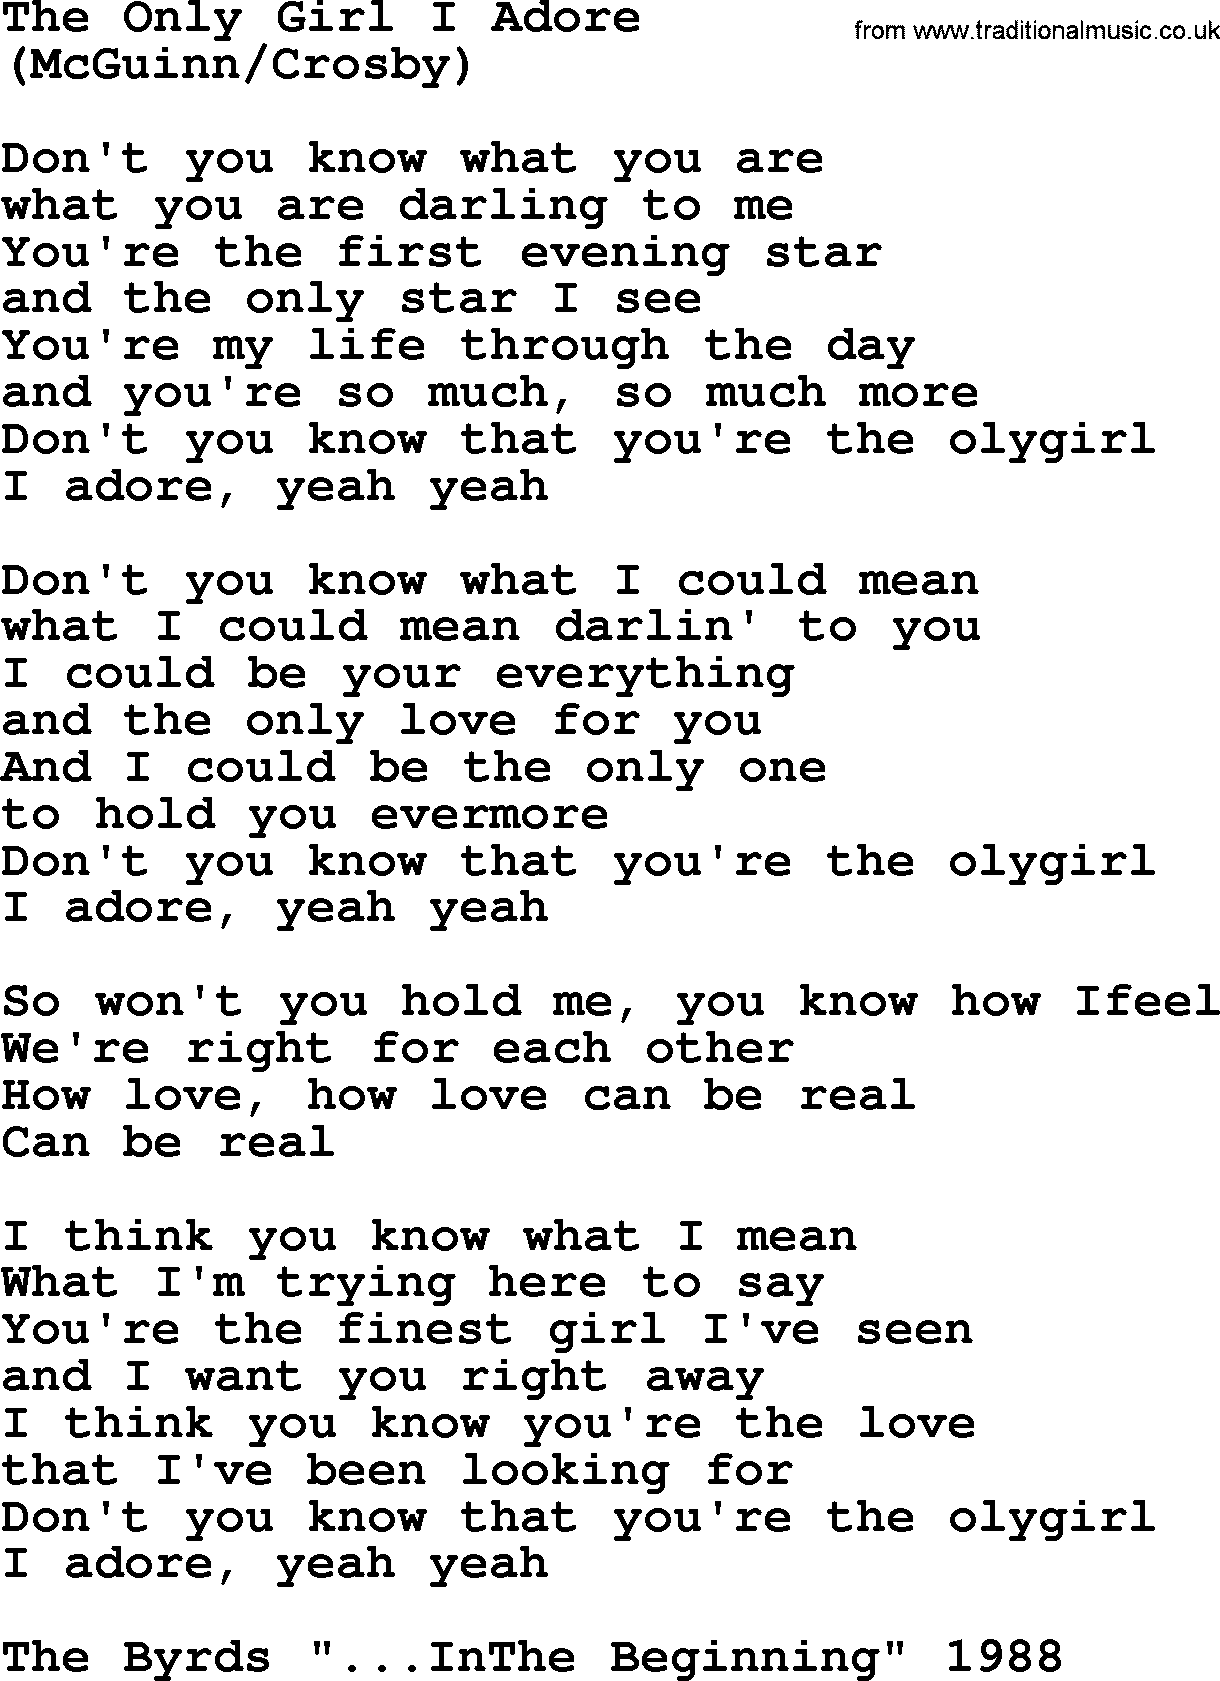 The Byrds song The Only Girl I Adore, lyrics